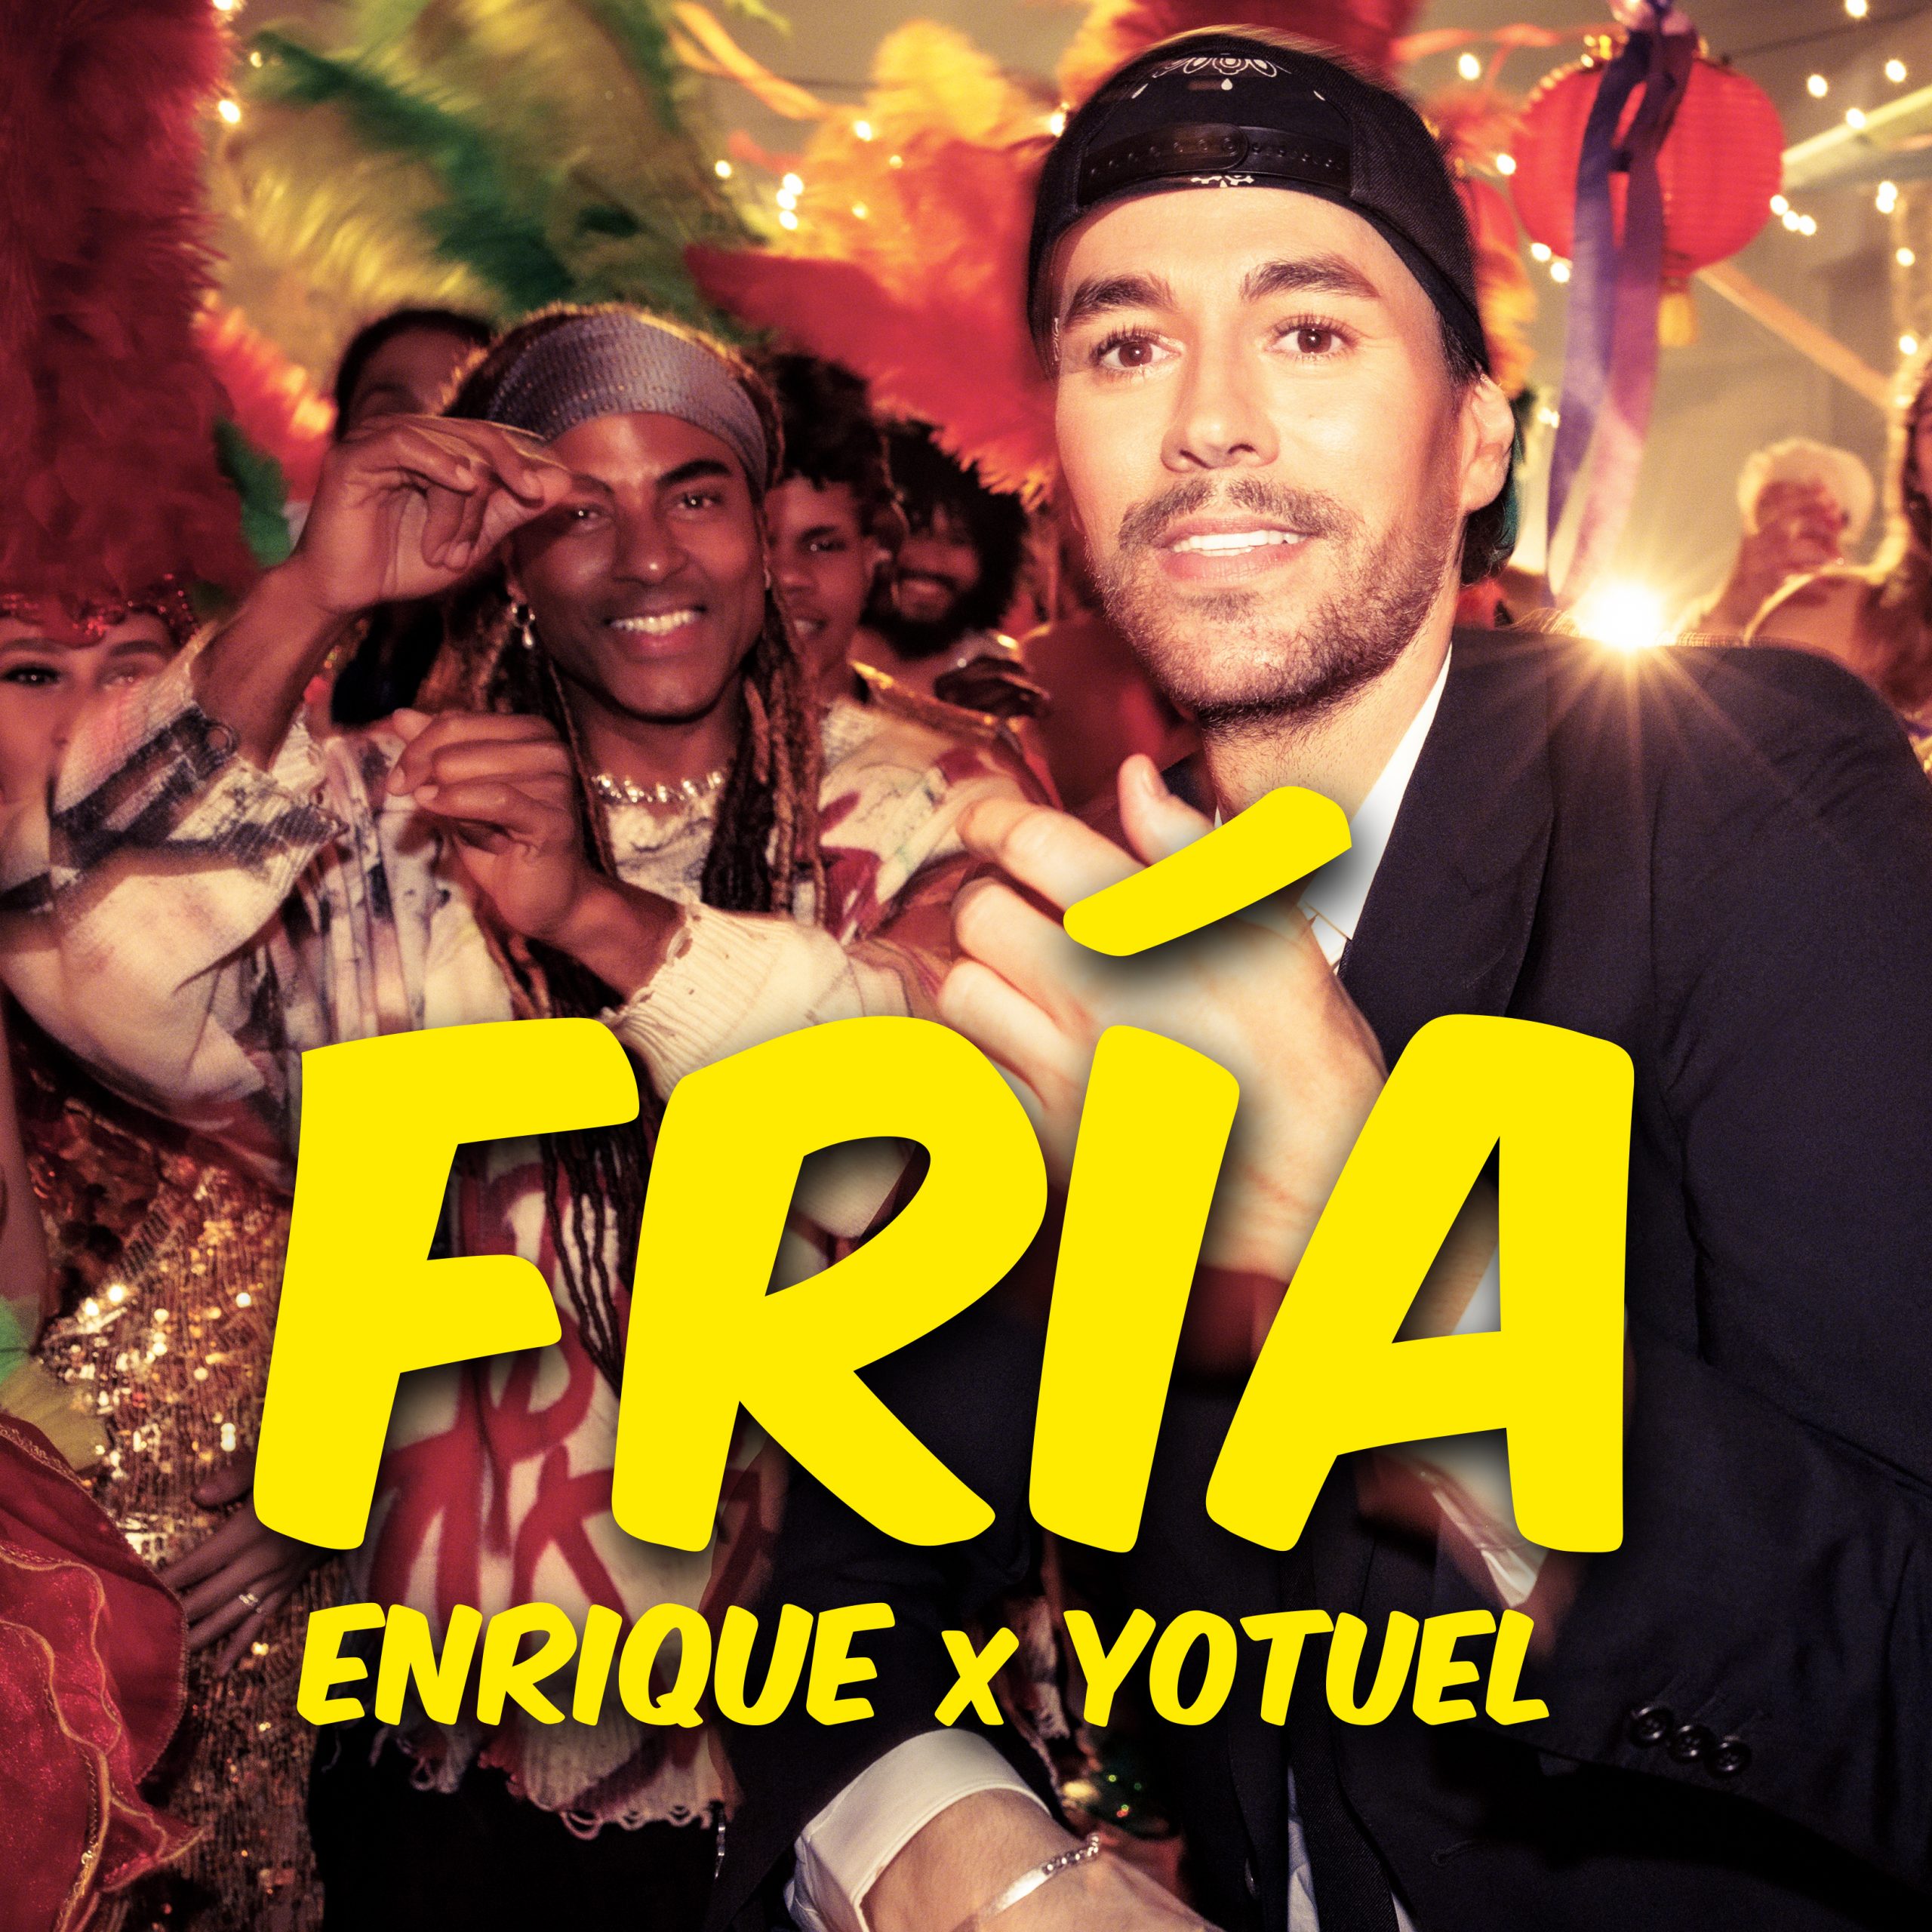 You are currently viewing SuperNove: Enrique Iglesias & Yotuel – Fria (21.02)